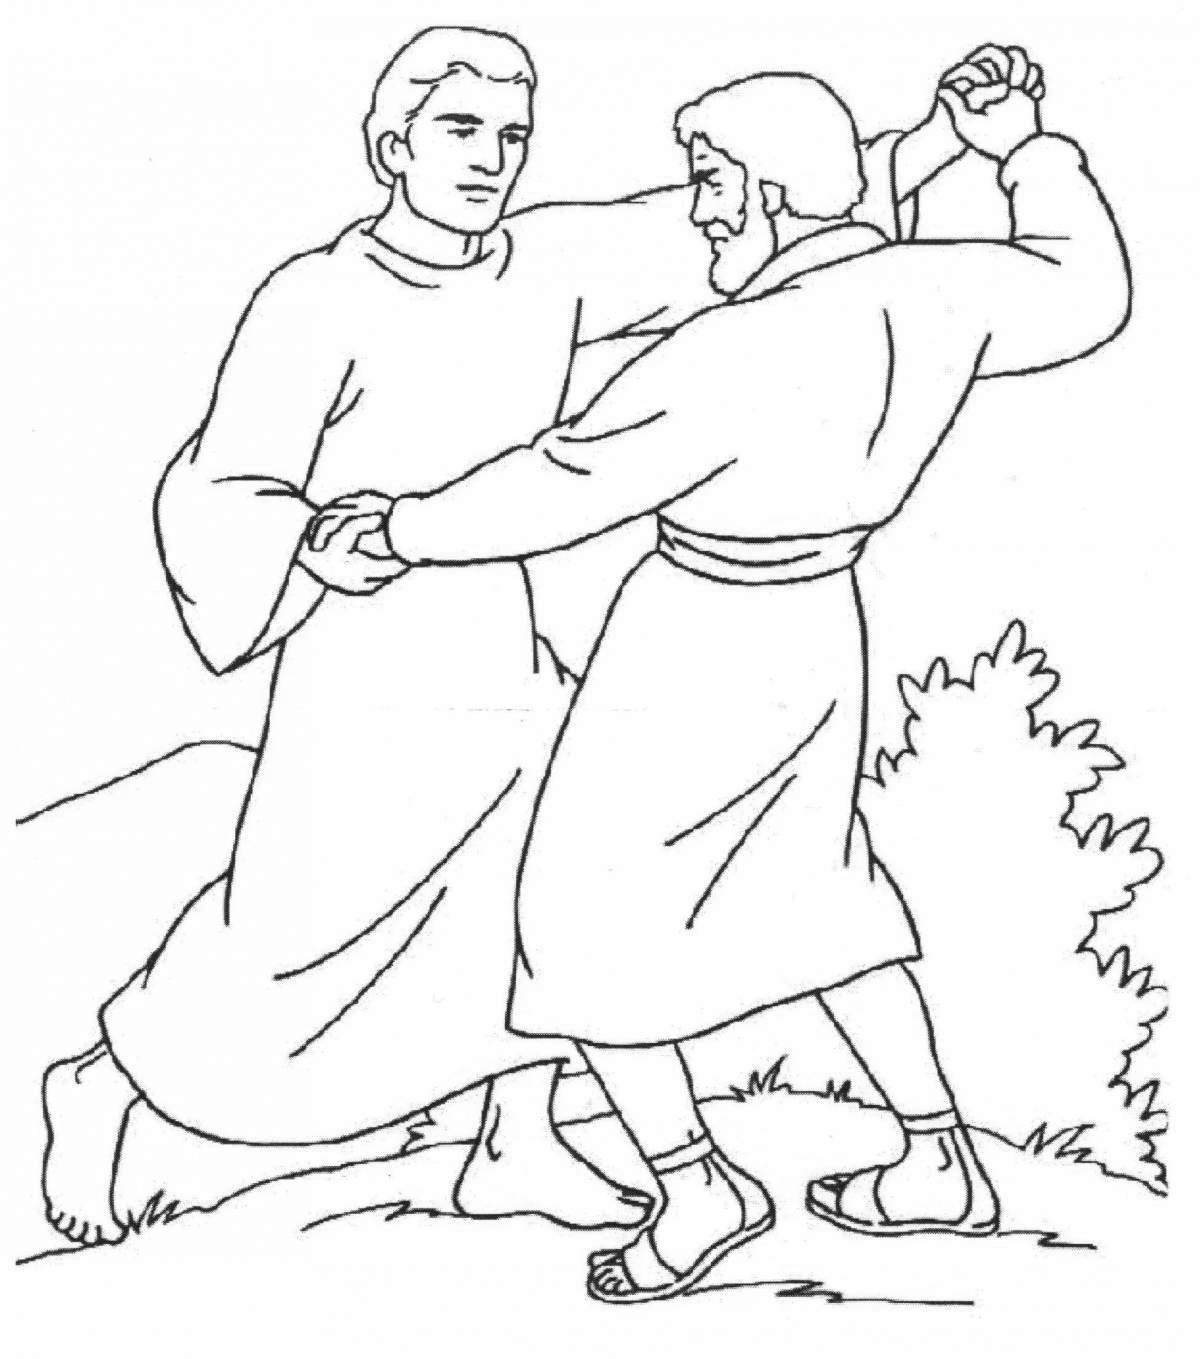 Colorful Esau and Jacob coloring book